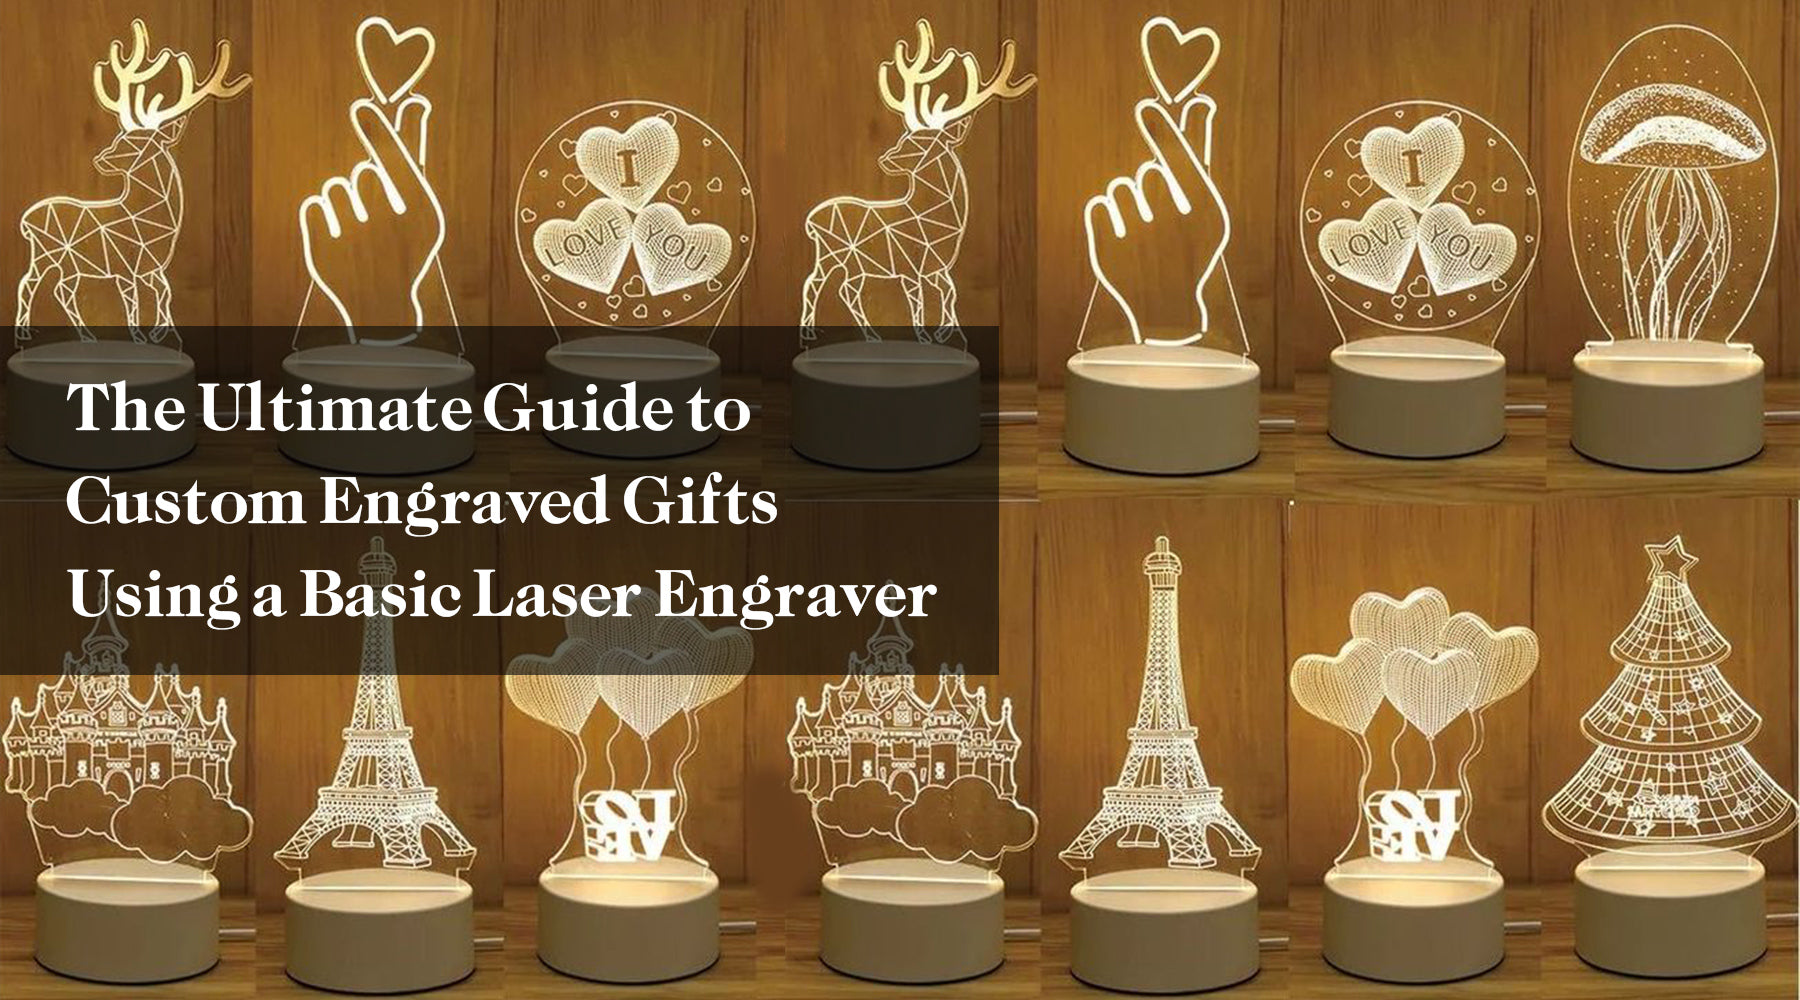 The Ultimate Guide to Custom Engraved Gifts Using a Basic Laser Engraver